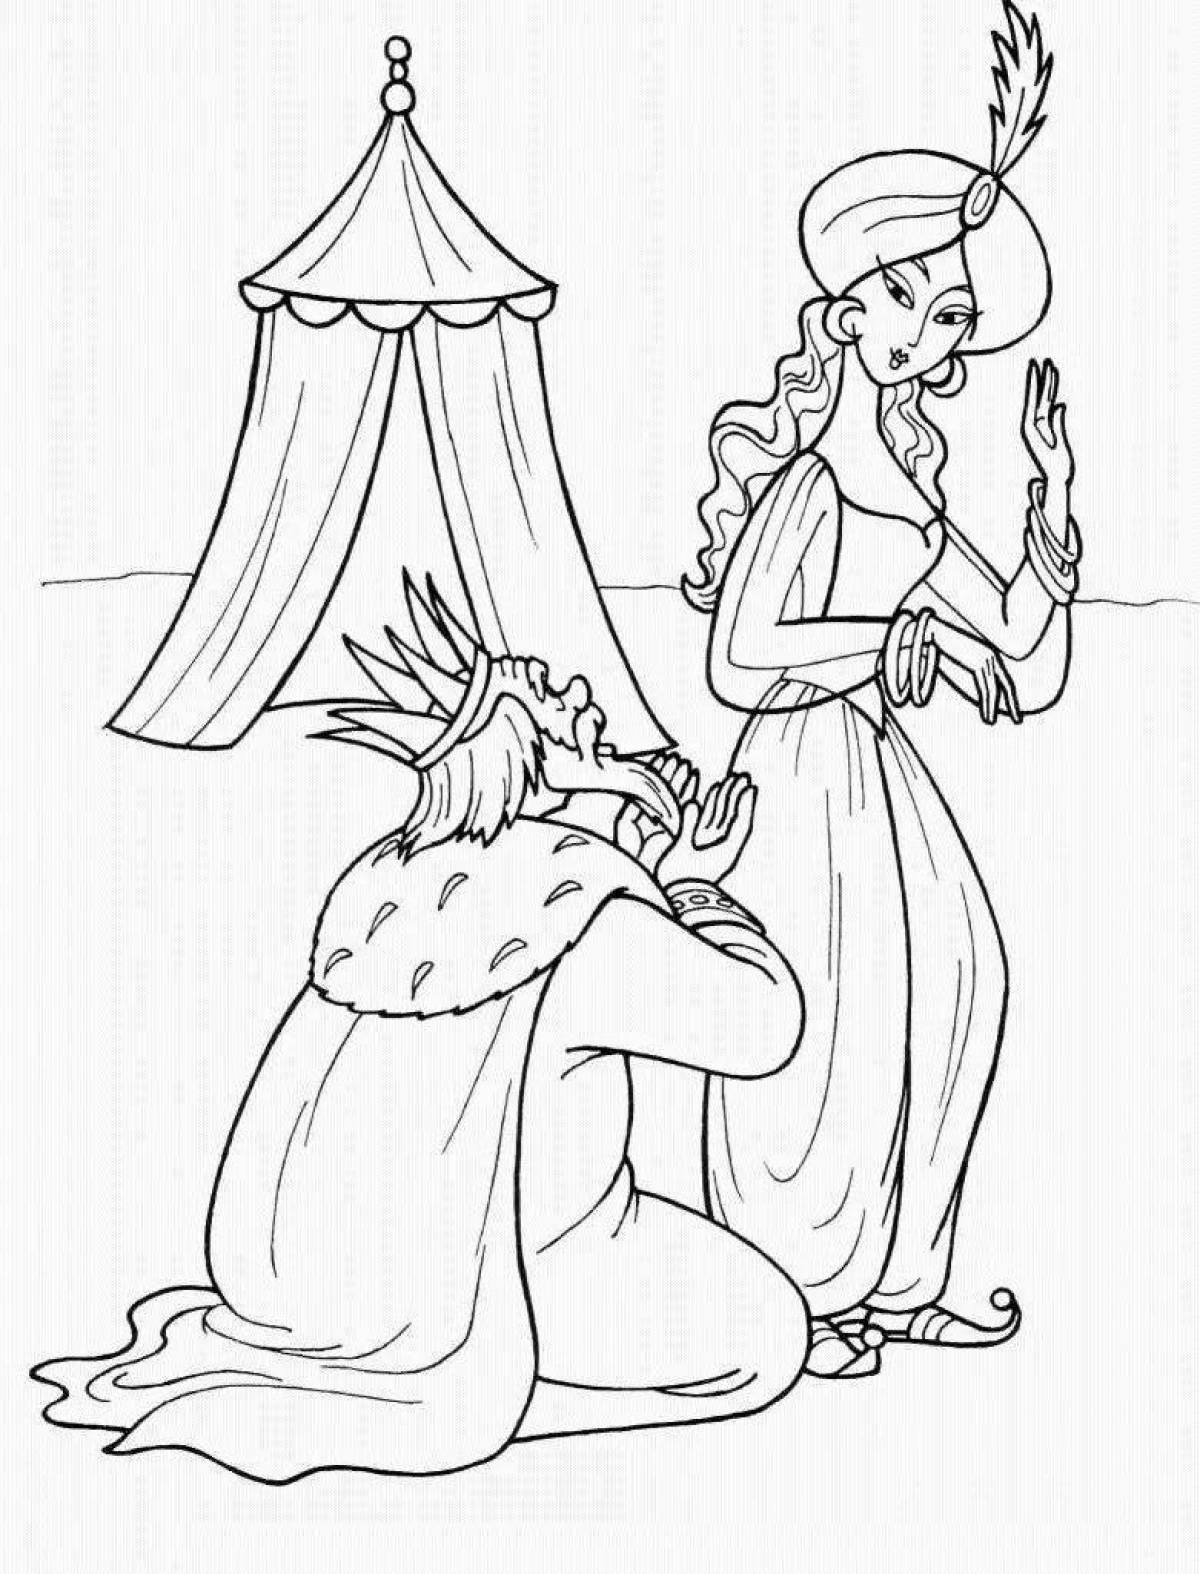 Mystical coloring book based on Pushkin's fairy tales